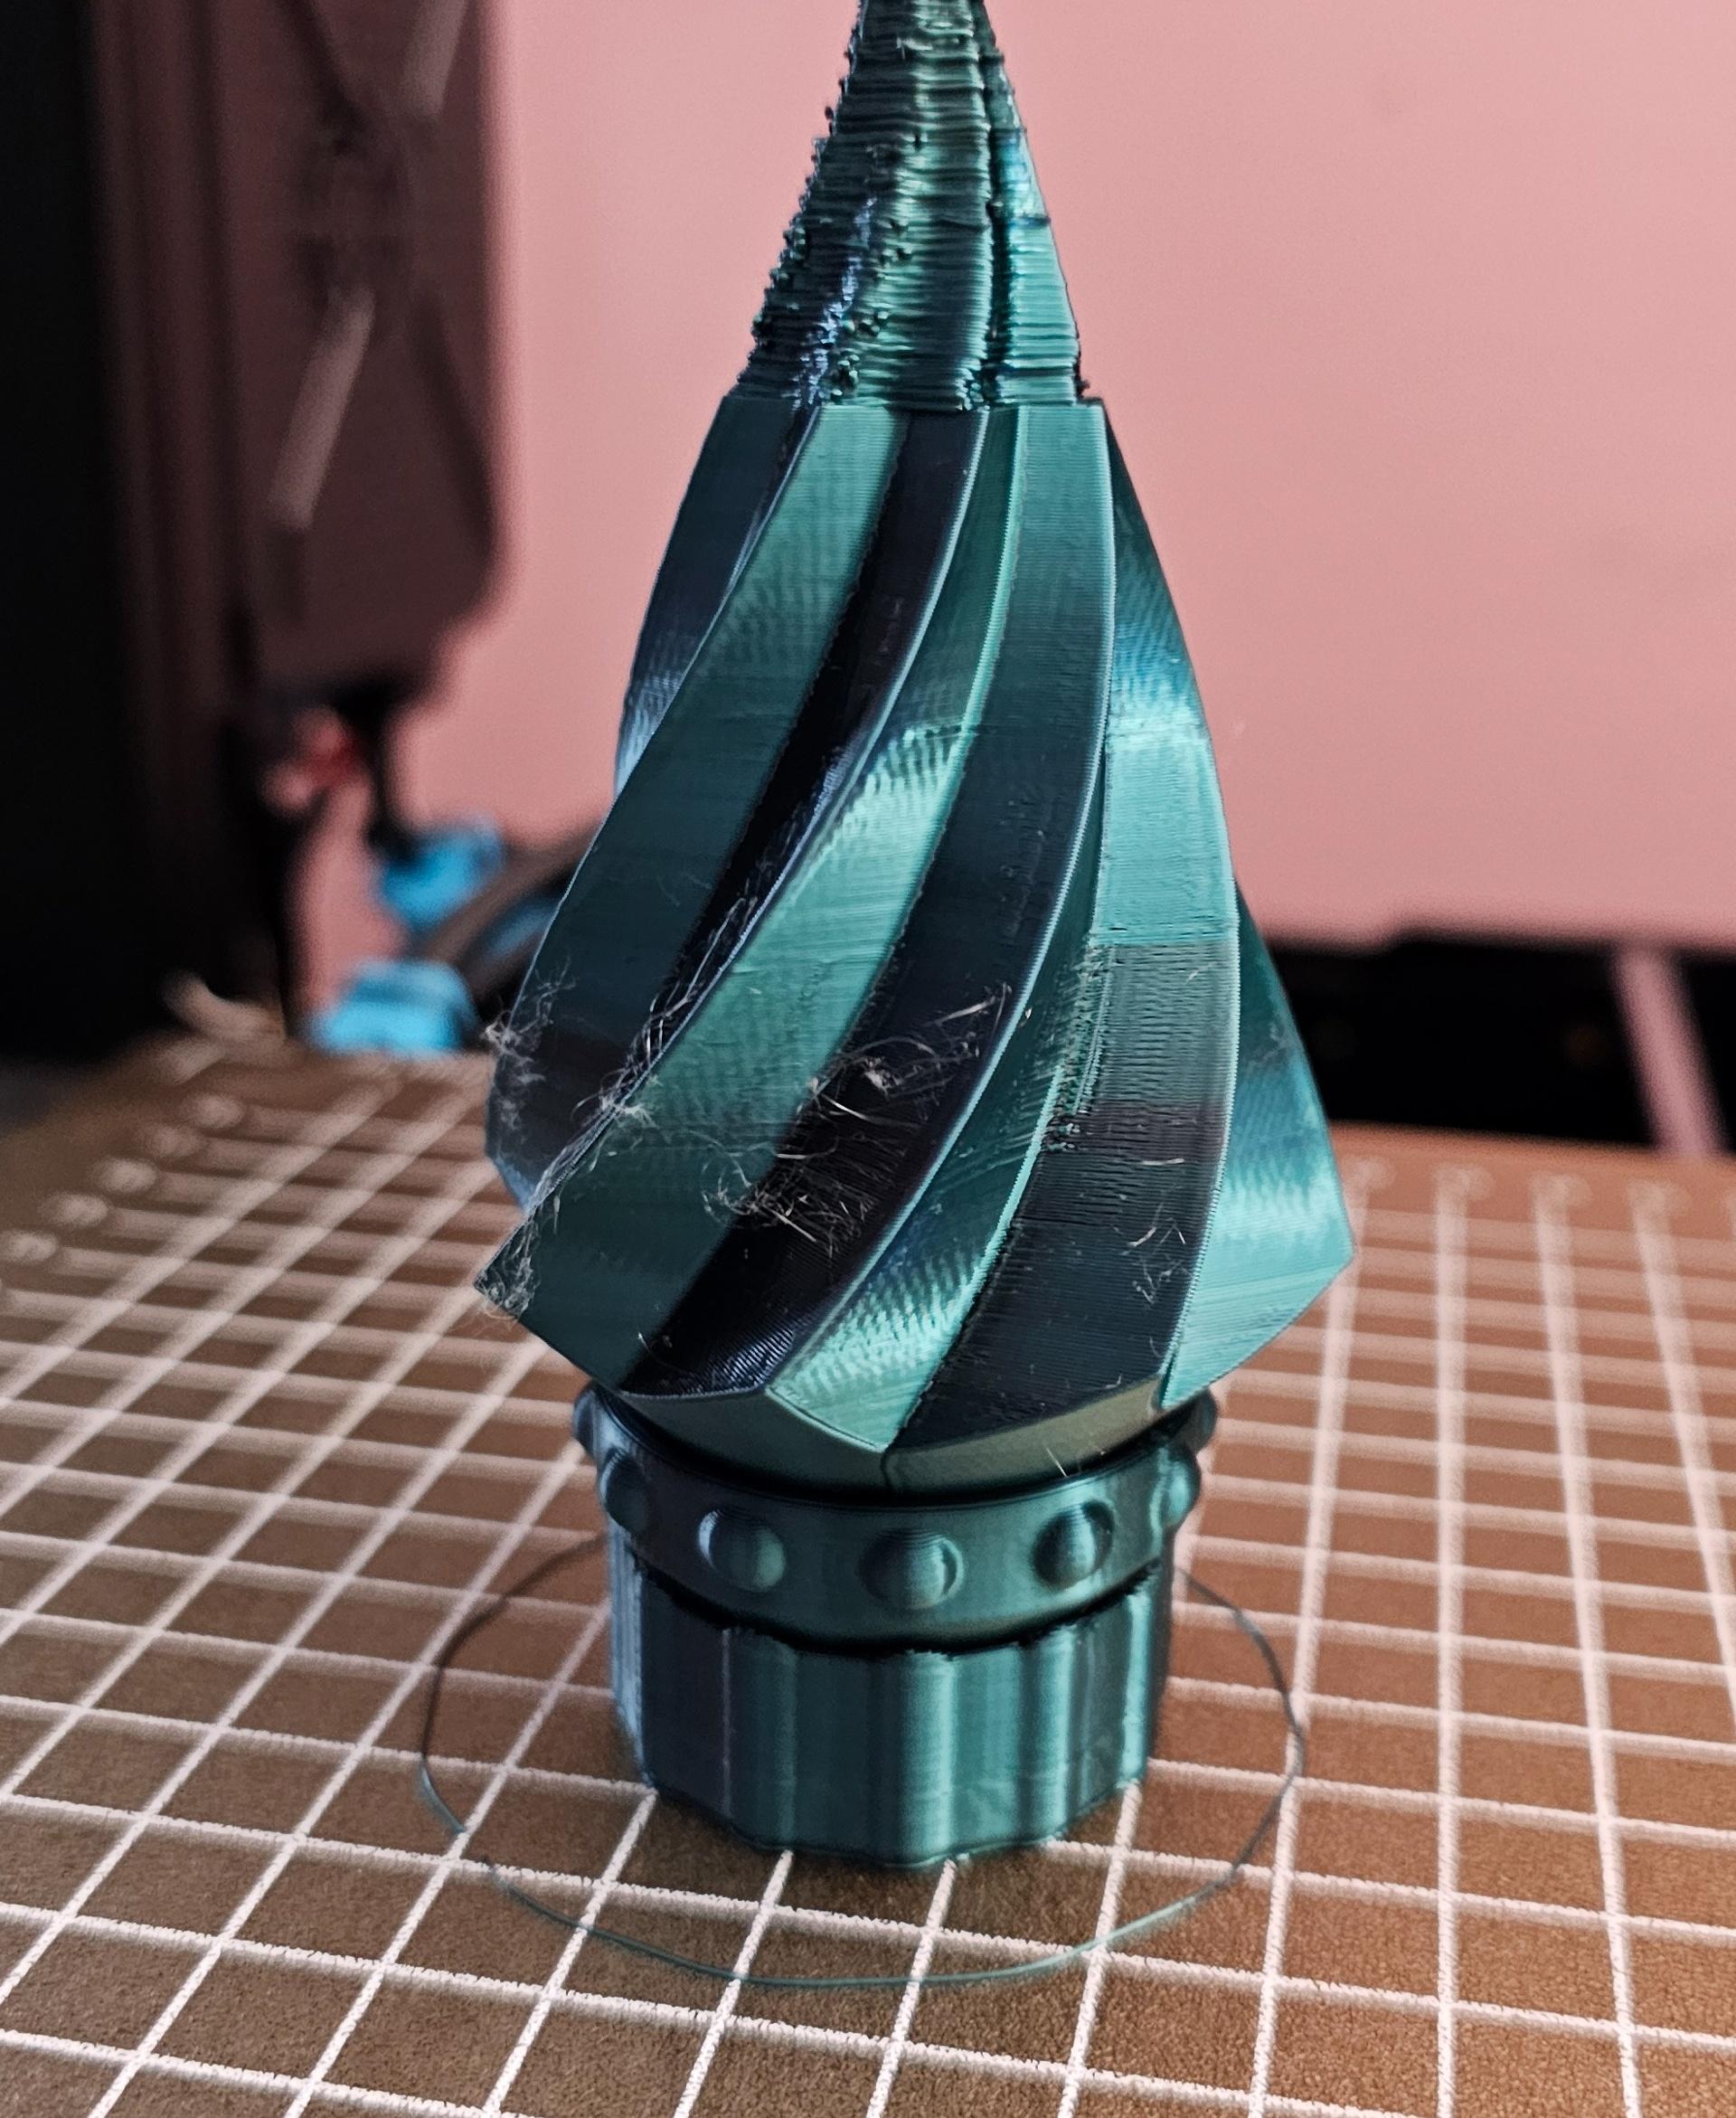 Planetary Tree  - It was printing really well until the tree portion started wobbling at around 90% complete.
3 of the 4 outer gears moved freely, took a bit of persuasion to get the last one working.
Figured I'd post the make anyway.
Might try again and use glue stick to ensure it stays firmly anchored to the PEI sheet while printing.  - 3d model